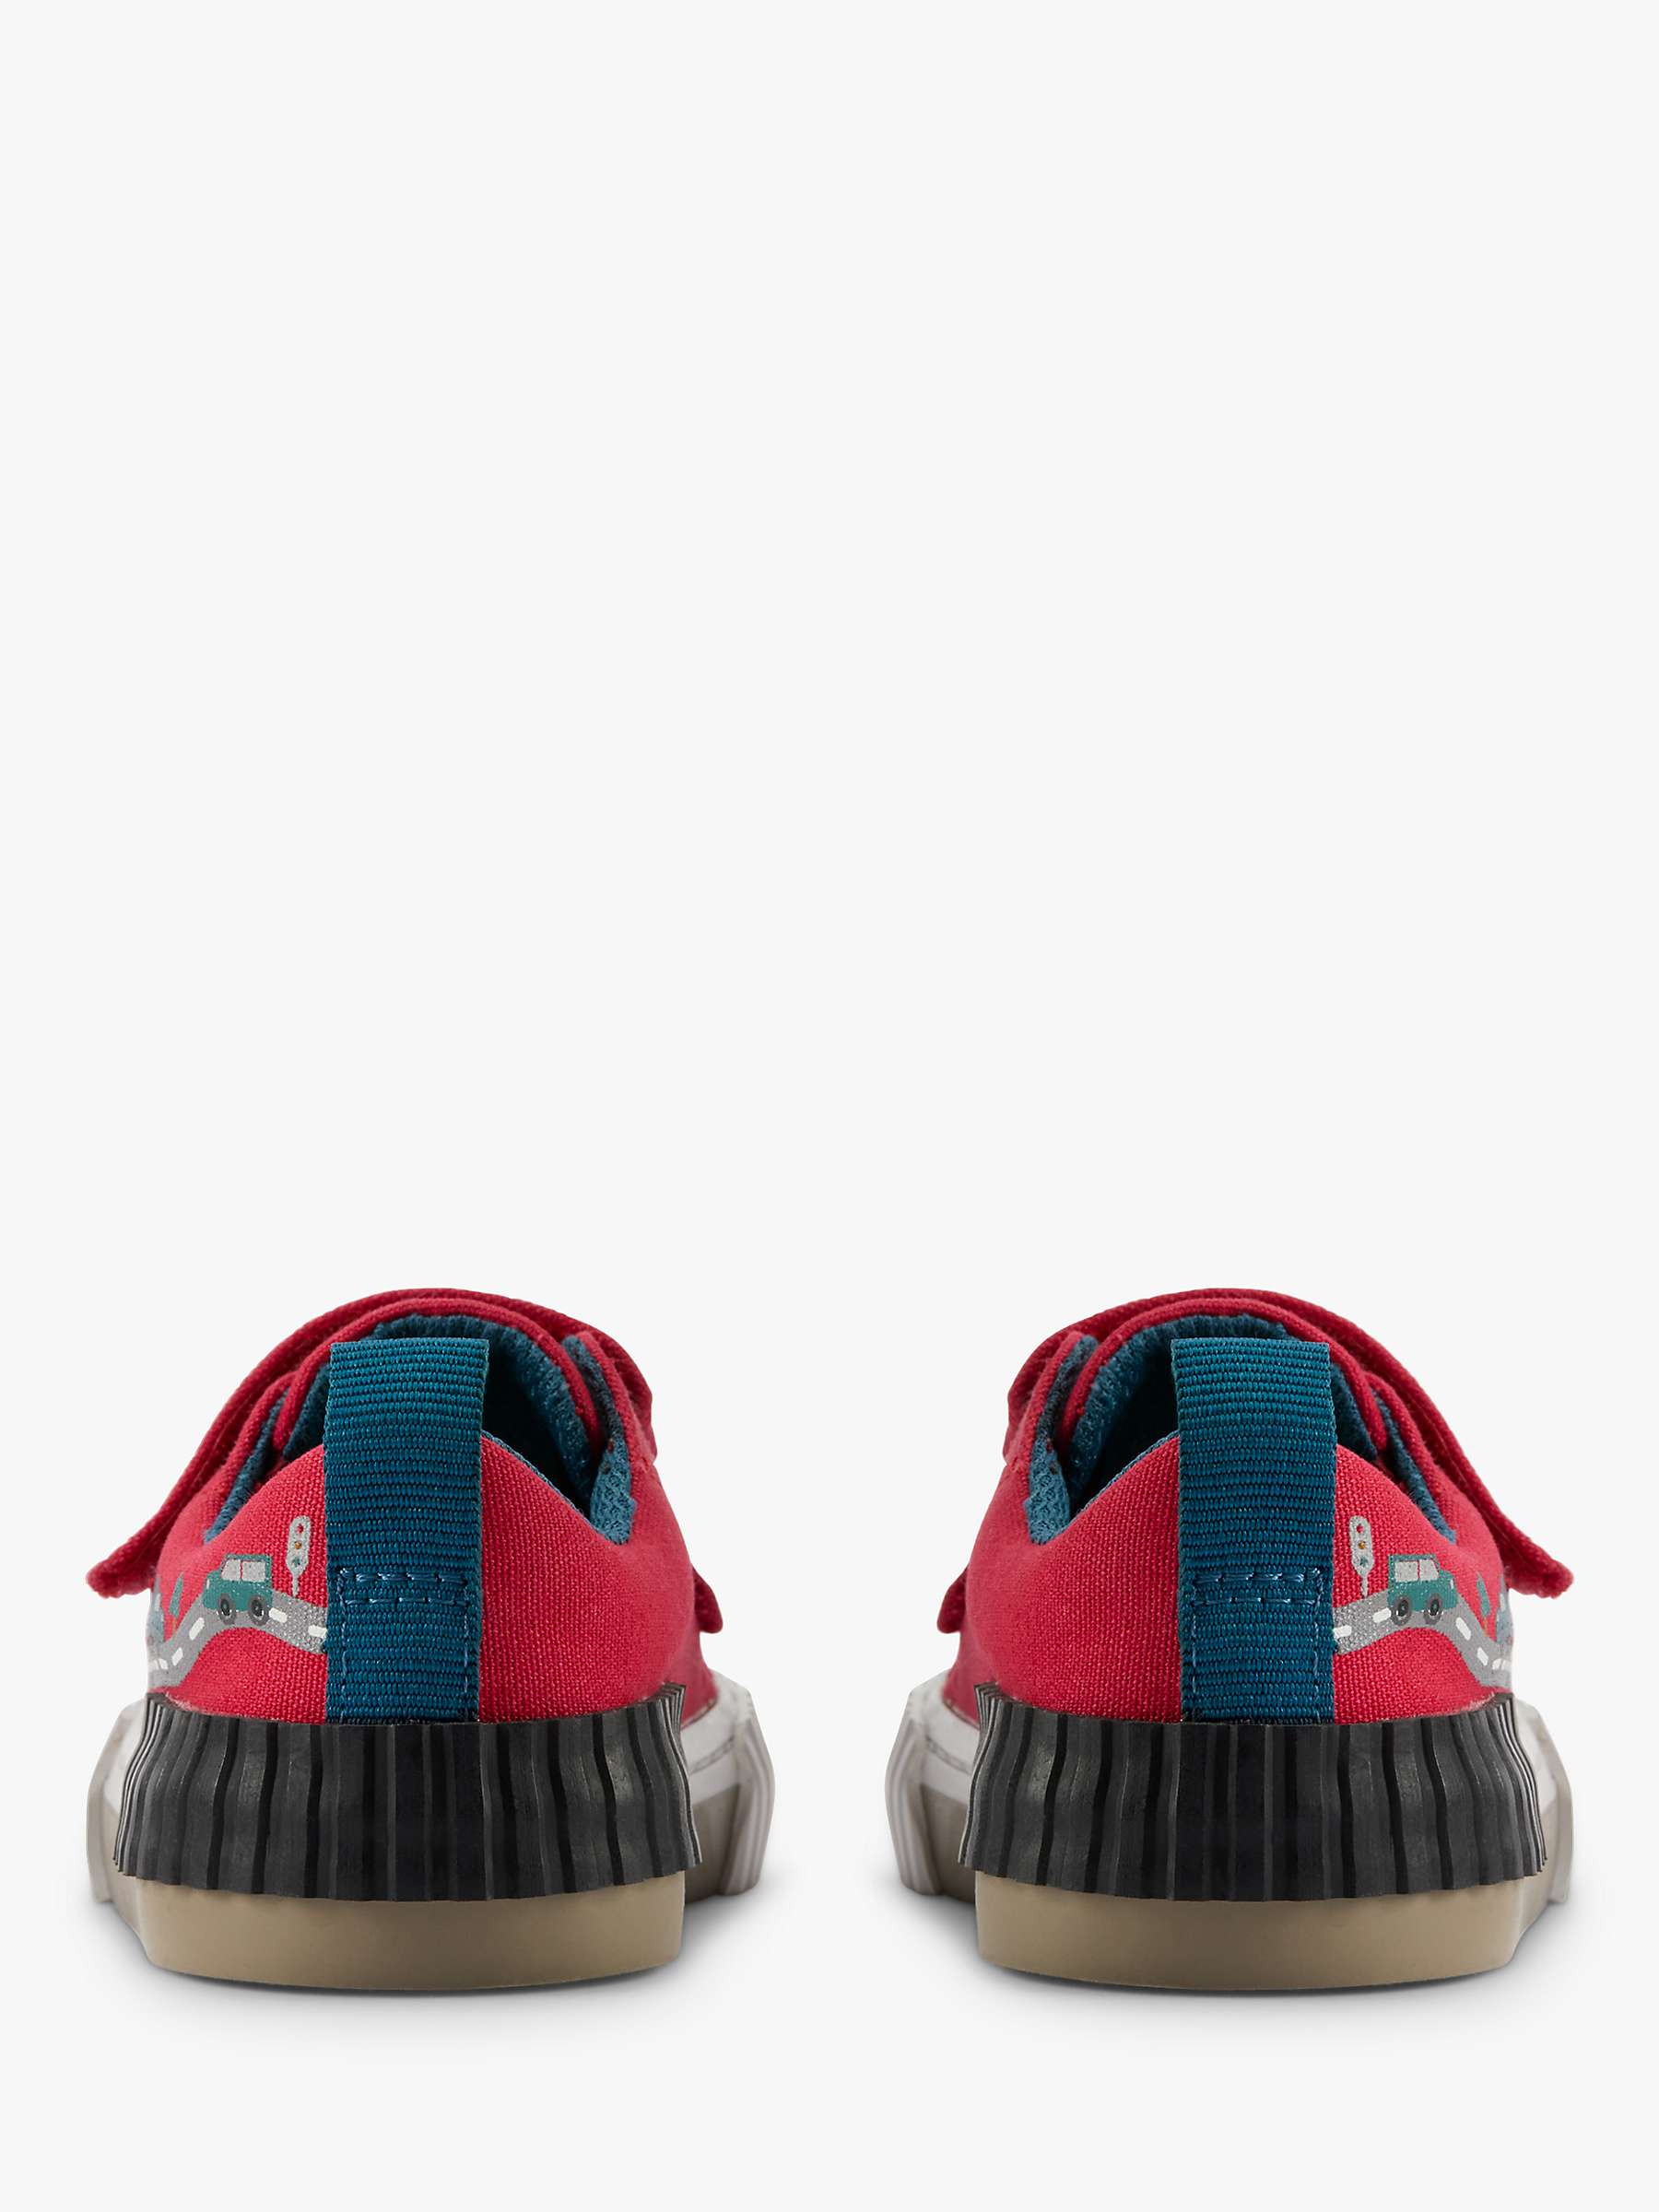 Buy Clarks Kids' Foxing Truck Canvas Shoes, Red/Multi Online at johnlewis.com